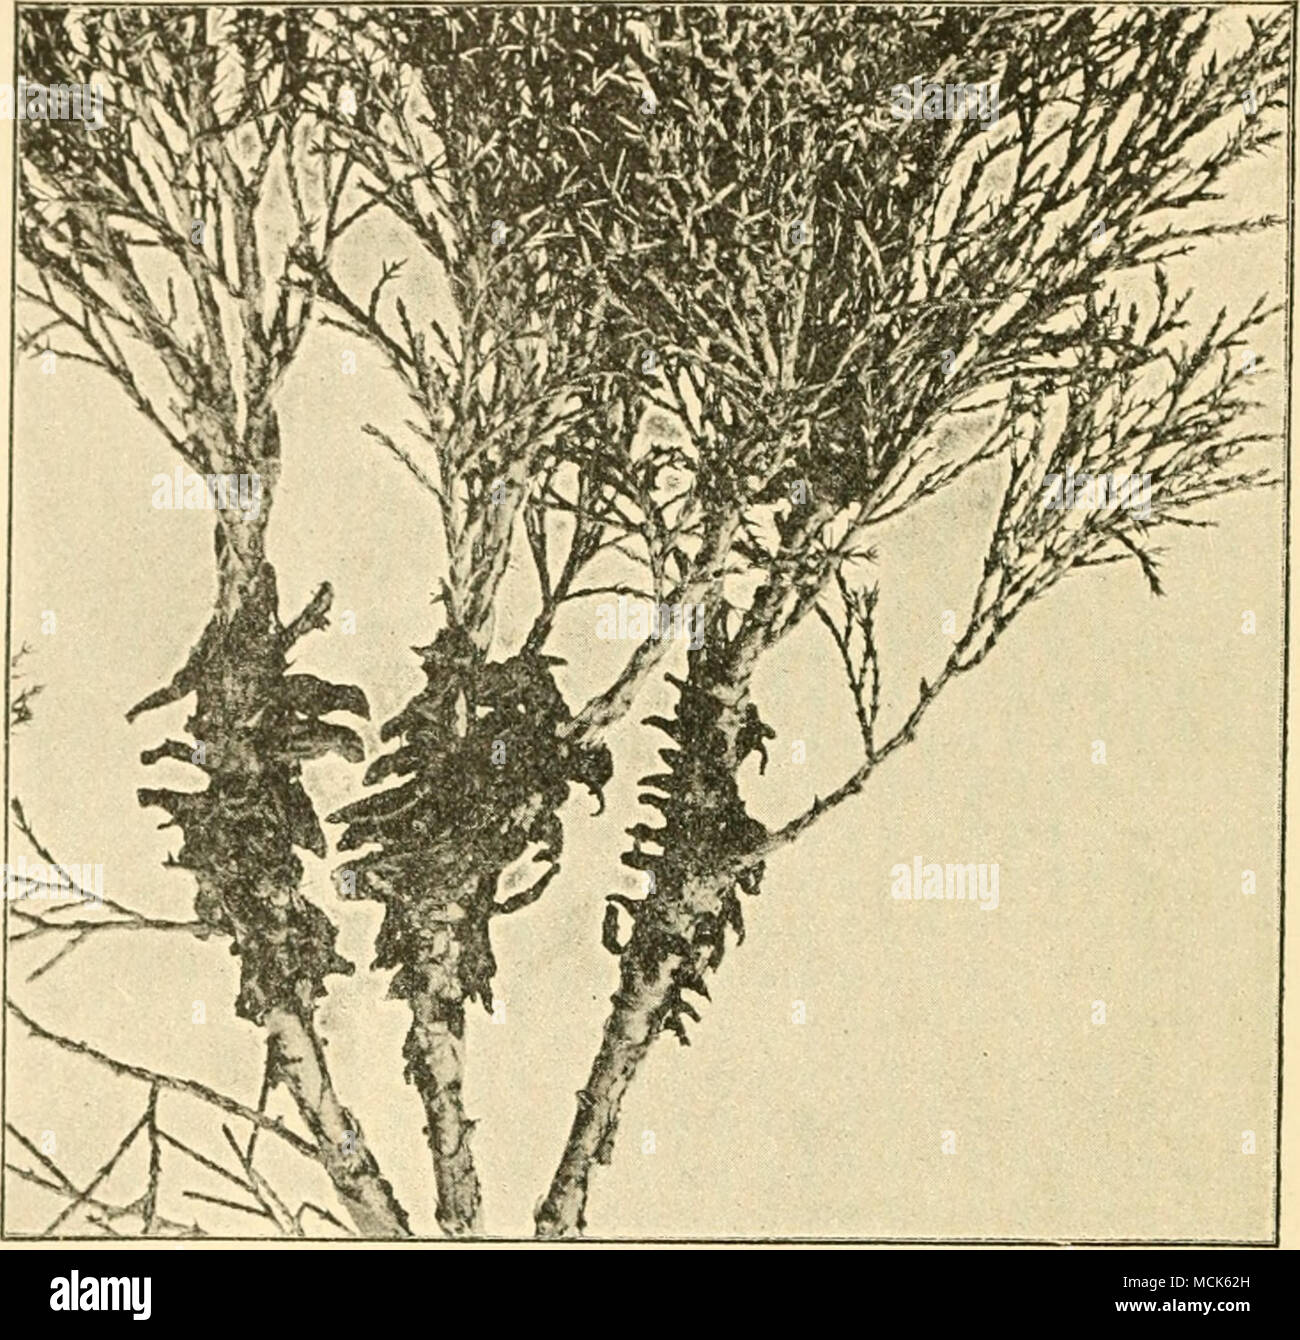 Fig 2 Il Gi Iiinos Gt Orunpium binae On Twigs Of Junipirux Sidjimi At The Time Nf Lilicnitiou Of Spores V Tubeuf I Gt Hot Twigs And Scale Leaves These Bodies Absorb Water Swell And Run Together Forming Transparent